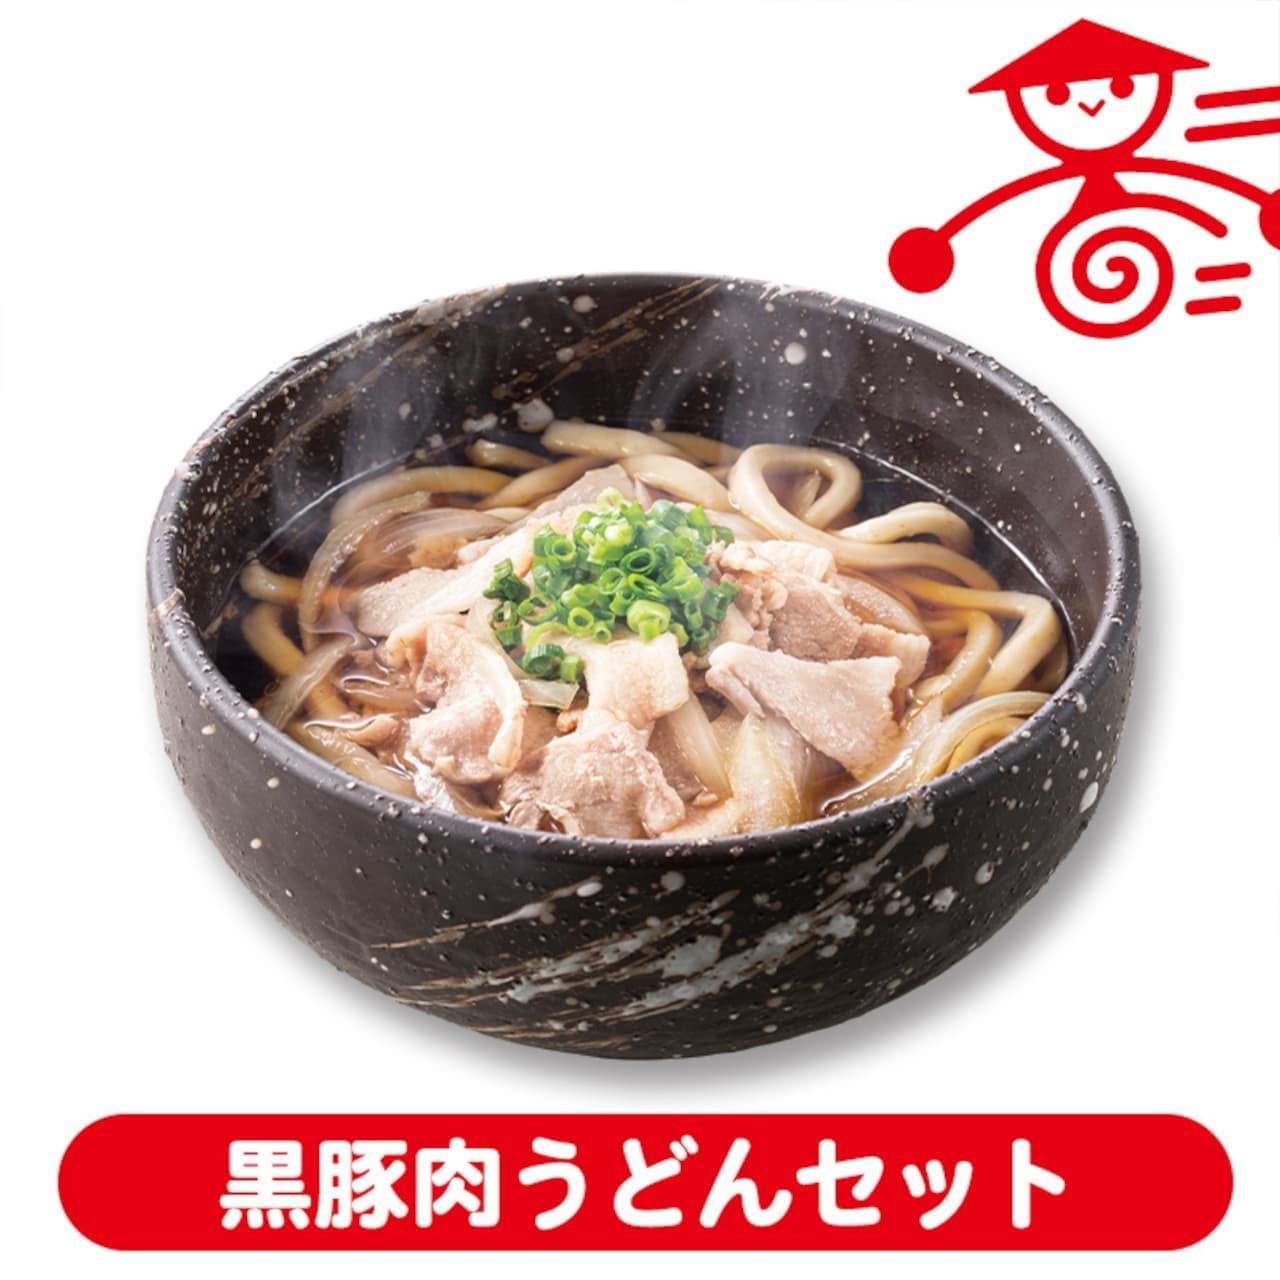  "Yamada Udon's Shortcut Meal" is now available through official mail order.